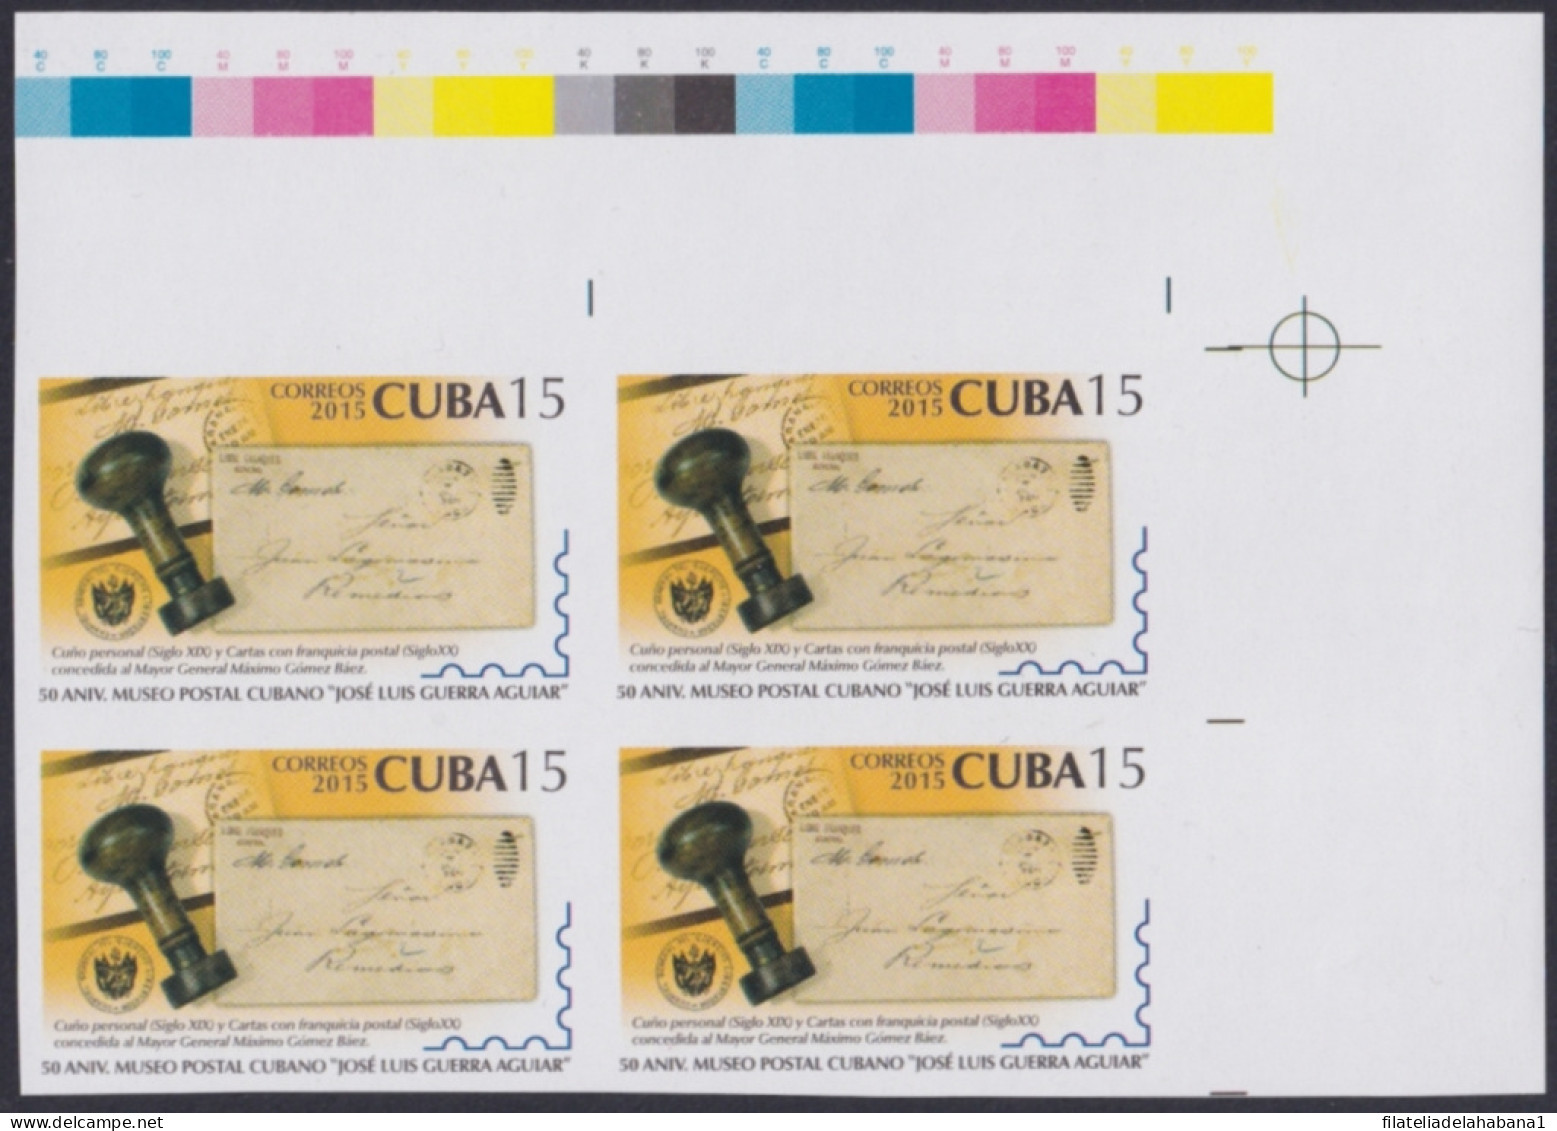 2013.647 CUBA MNH 2013 150c IMPERFORATED PROOF POSTAL MUSEUM BLOCK 4. - Imperforates, Proofs & Errors